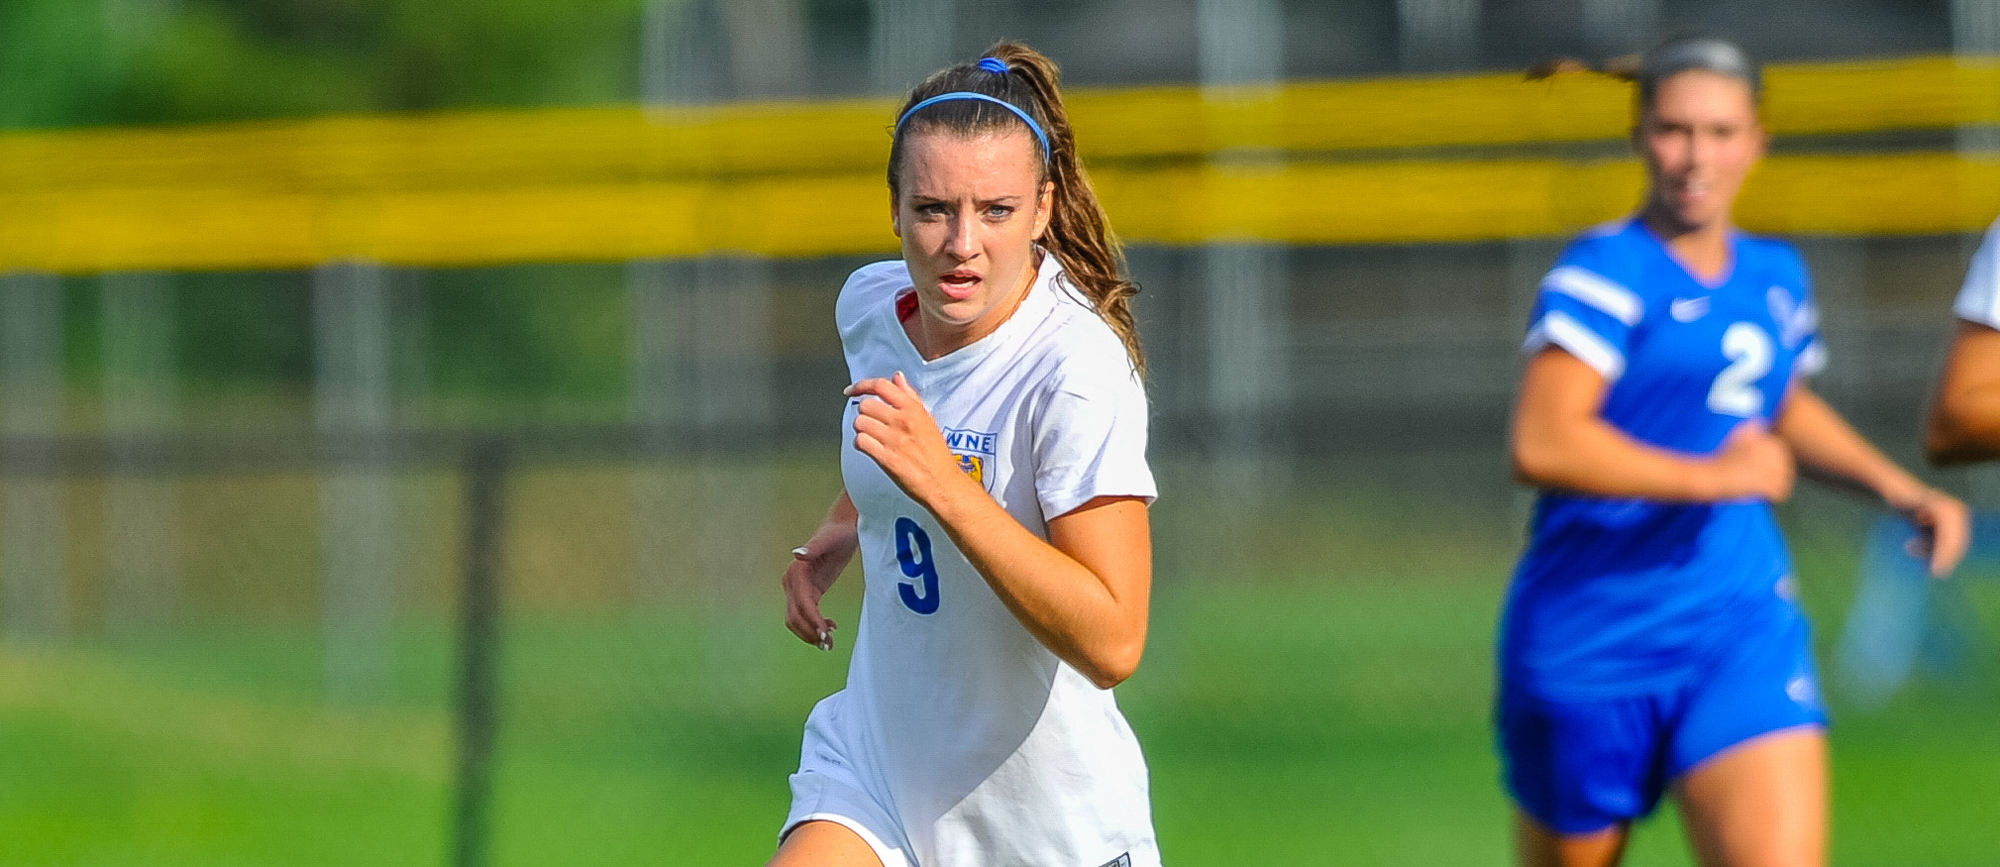 Golden Bears Blanked By University of New England in CCC Opener, 3-0